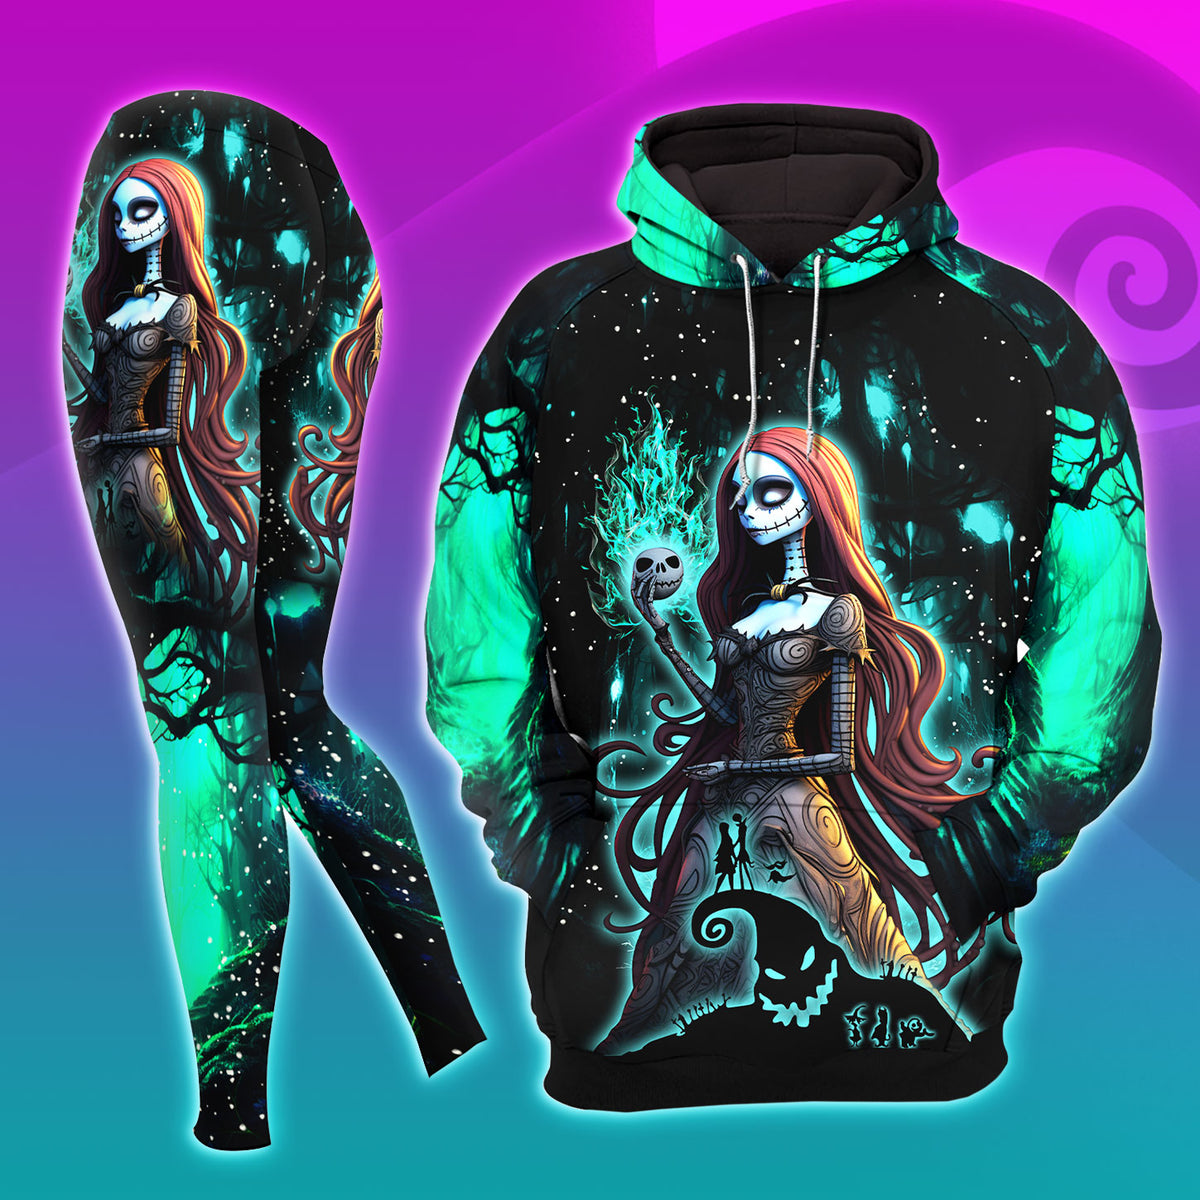 Dark Nightmare Couple Art Combo Hoodie and Leggings - Dark and edgy matching set with skull designs for a unique and stylish look.